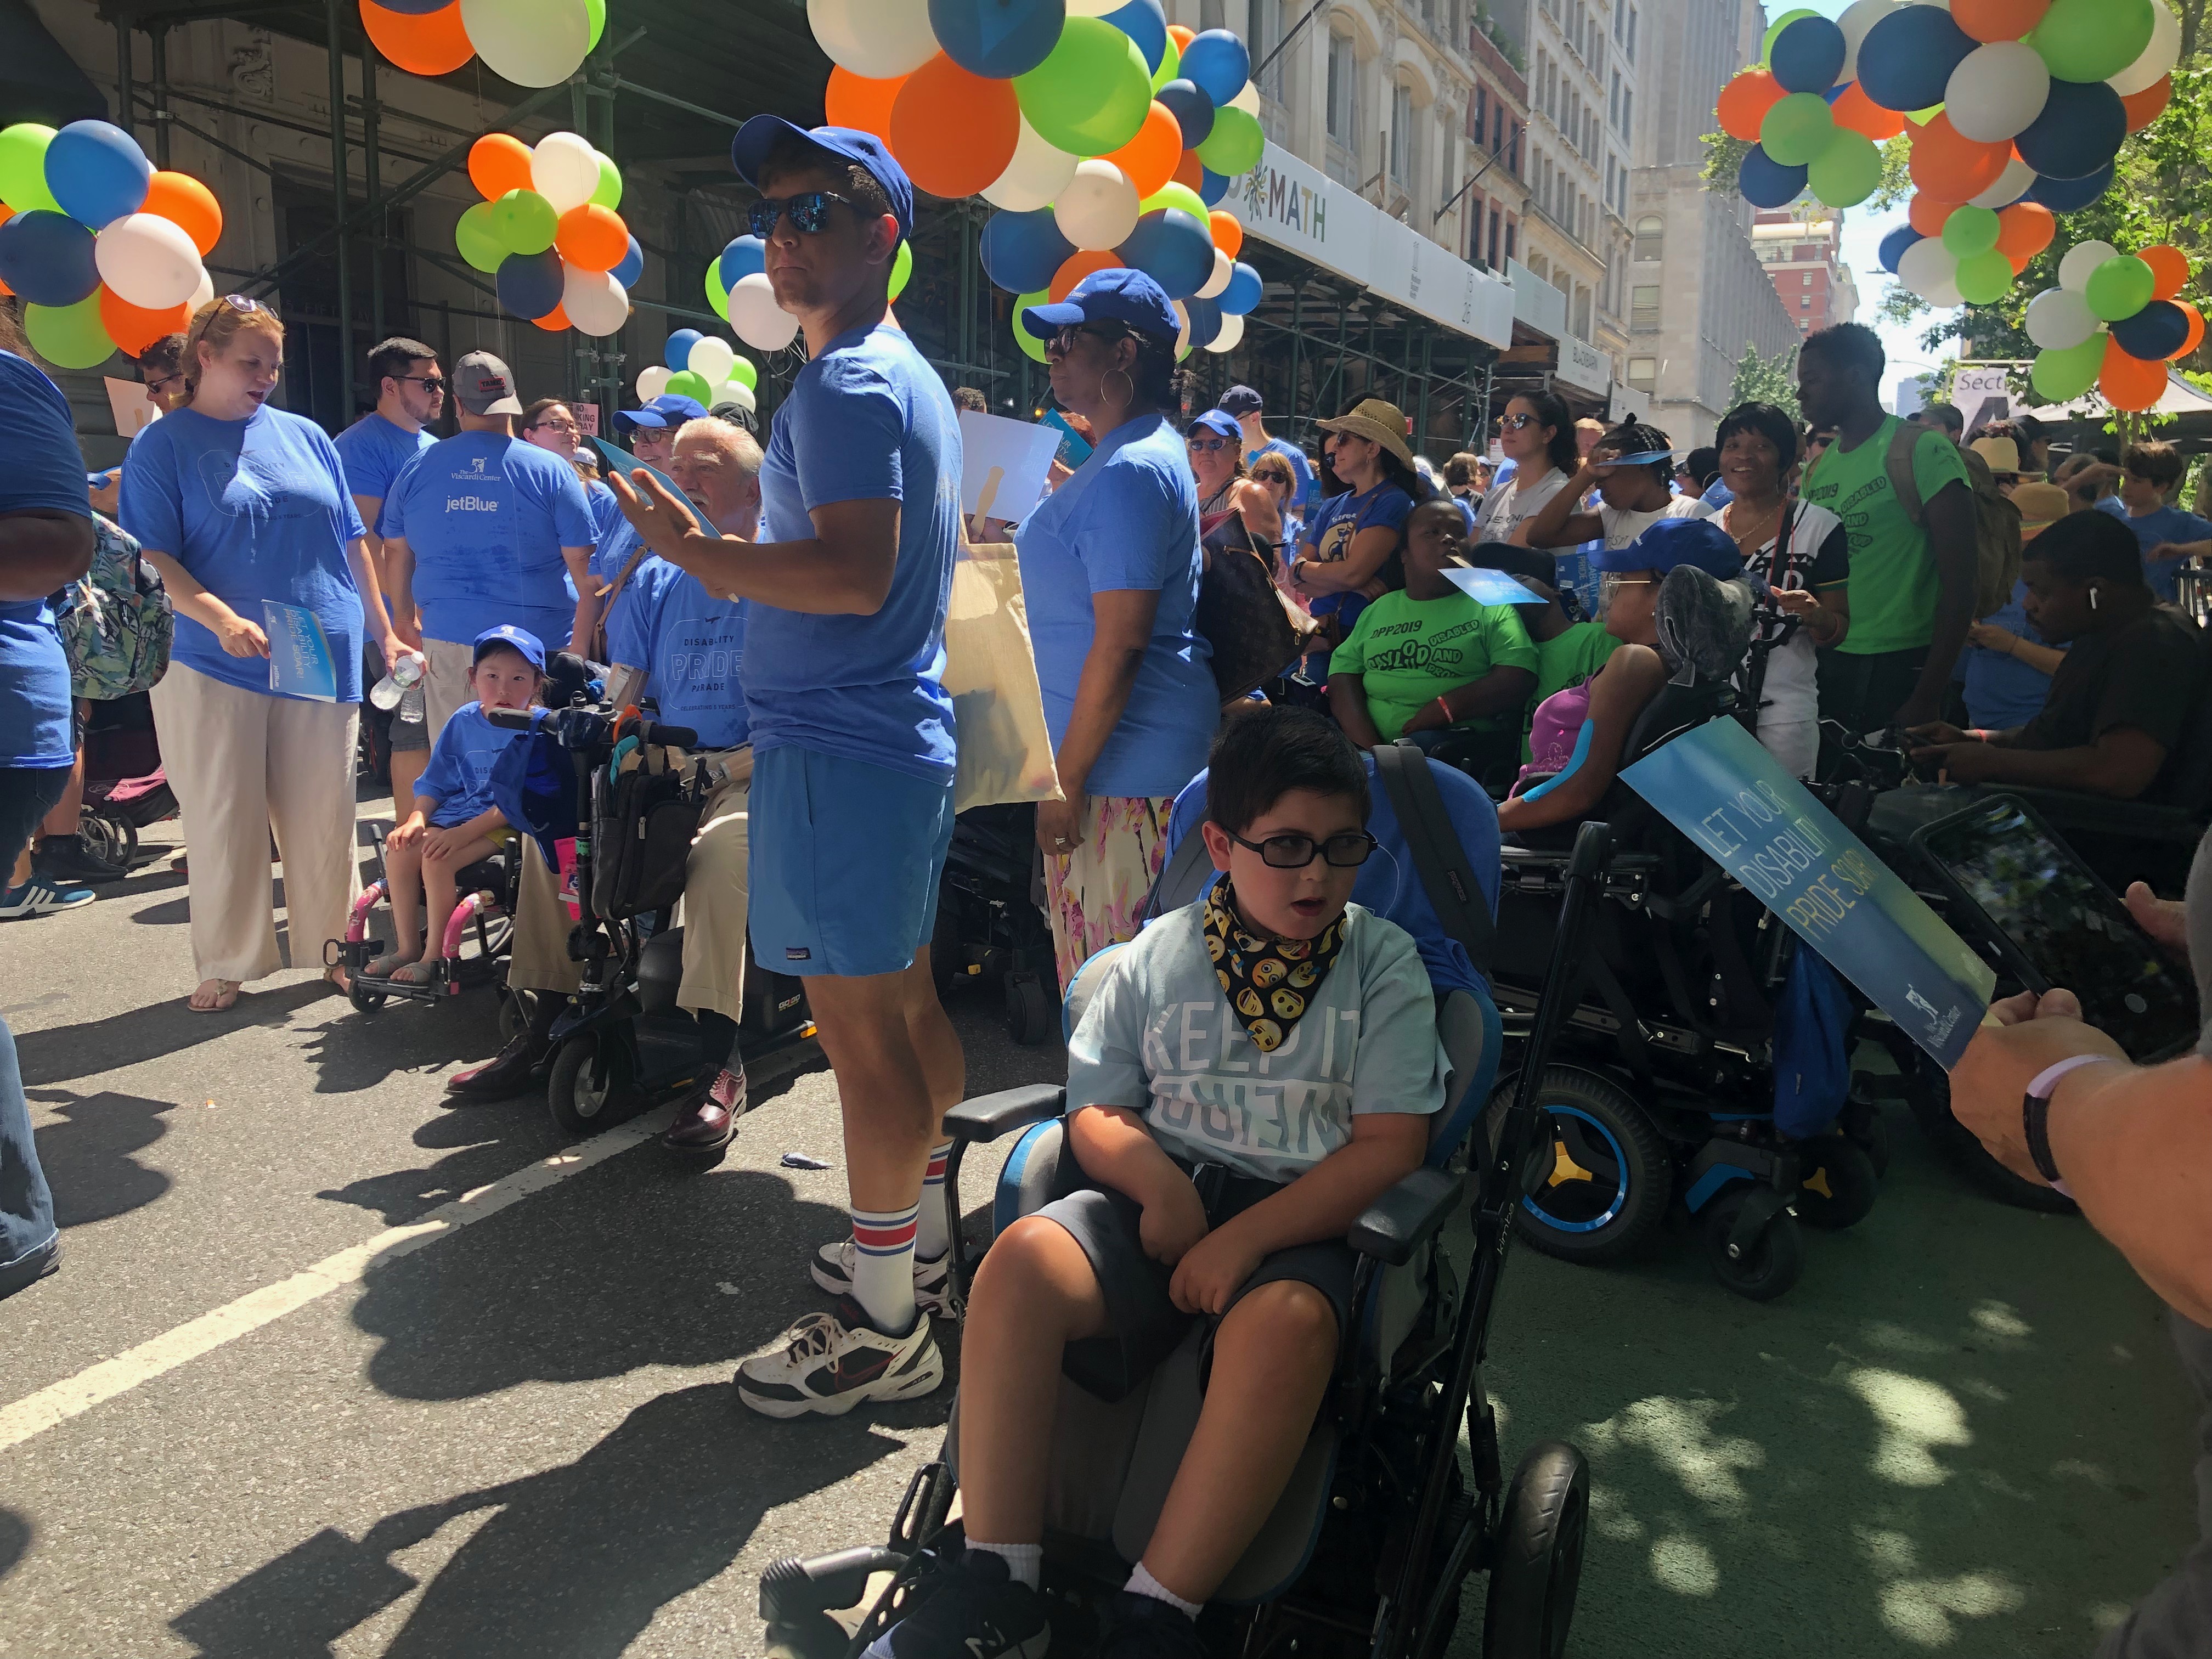 A young boy in mobility device getting ready to march in fifth annual disability pride parade, New York.